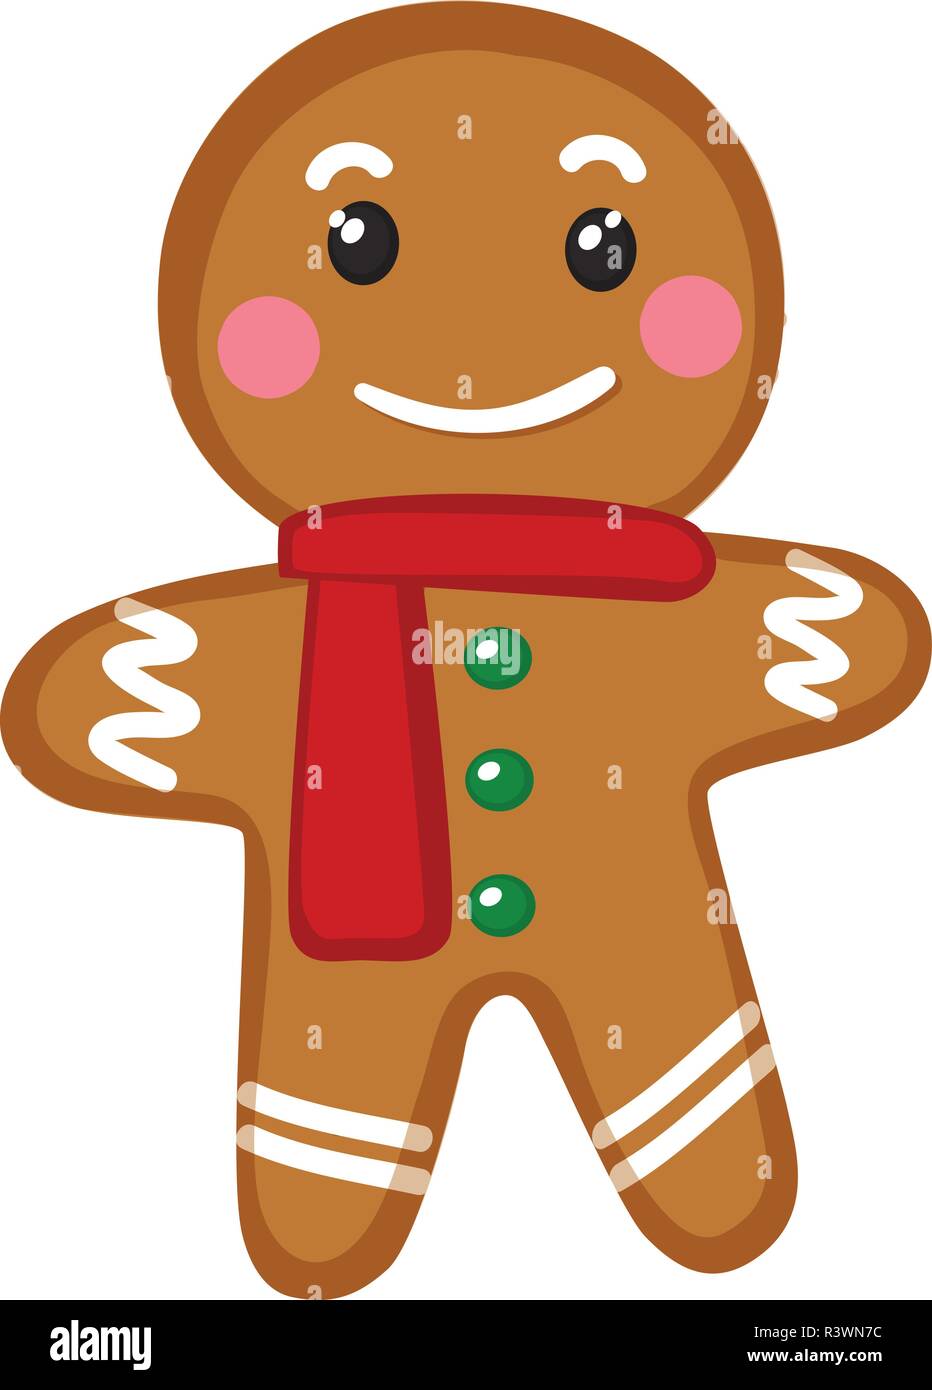 Vector Illustration Of Cute Smiling Cartoon Gingerbread Man Isolated On White Background Festive Holiday Sweet Christmas Cookie Decorated With Sugar Stock Vector Image Art Alamy